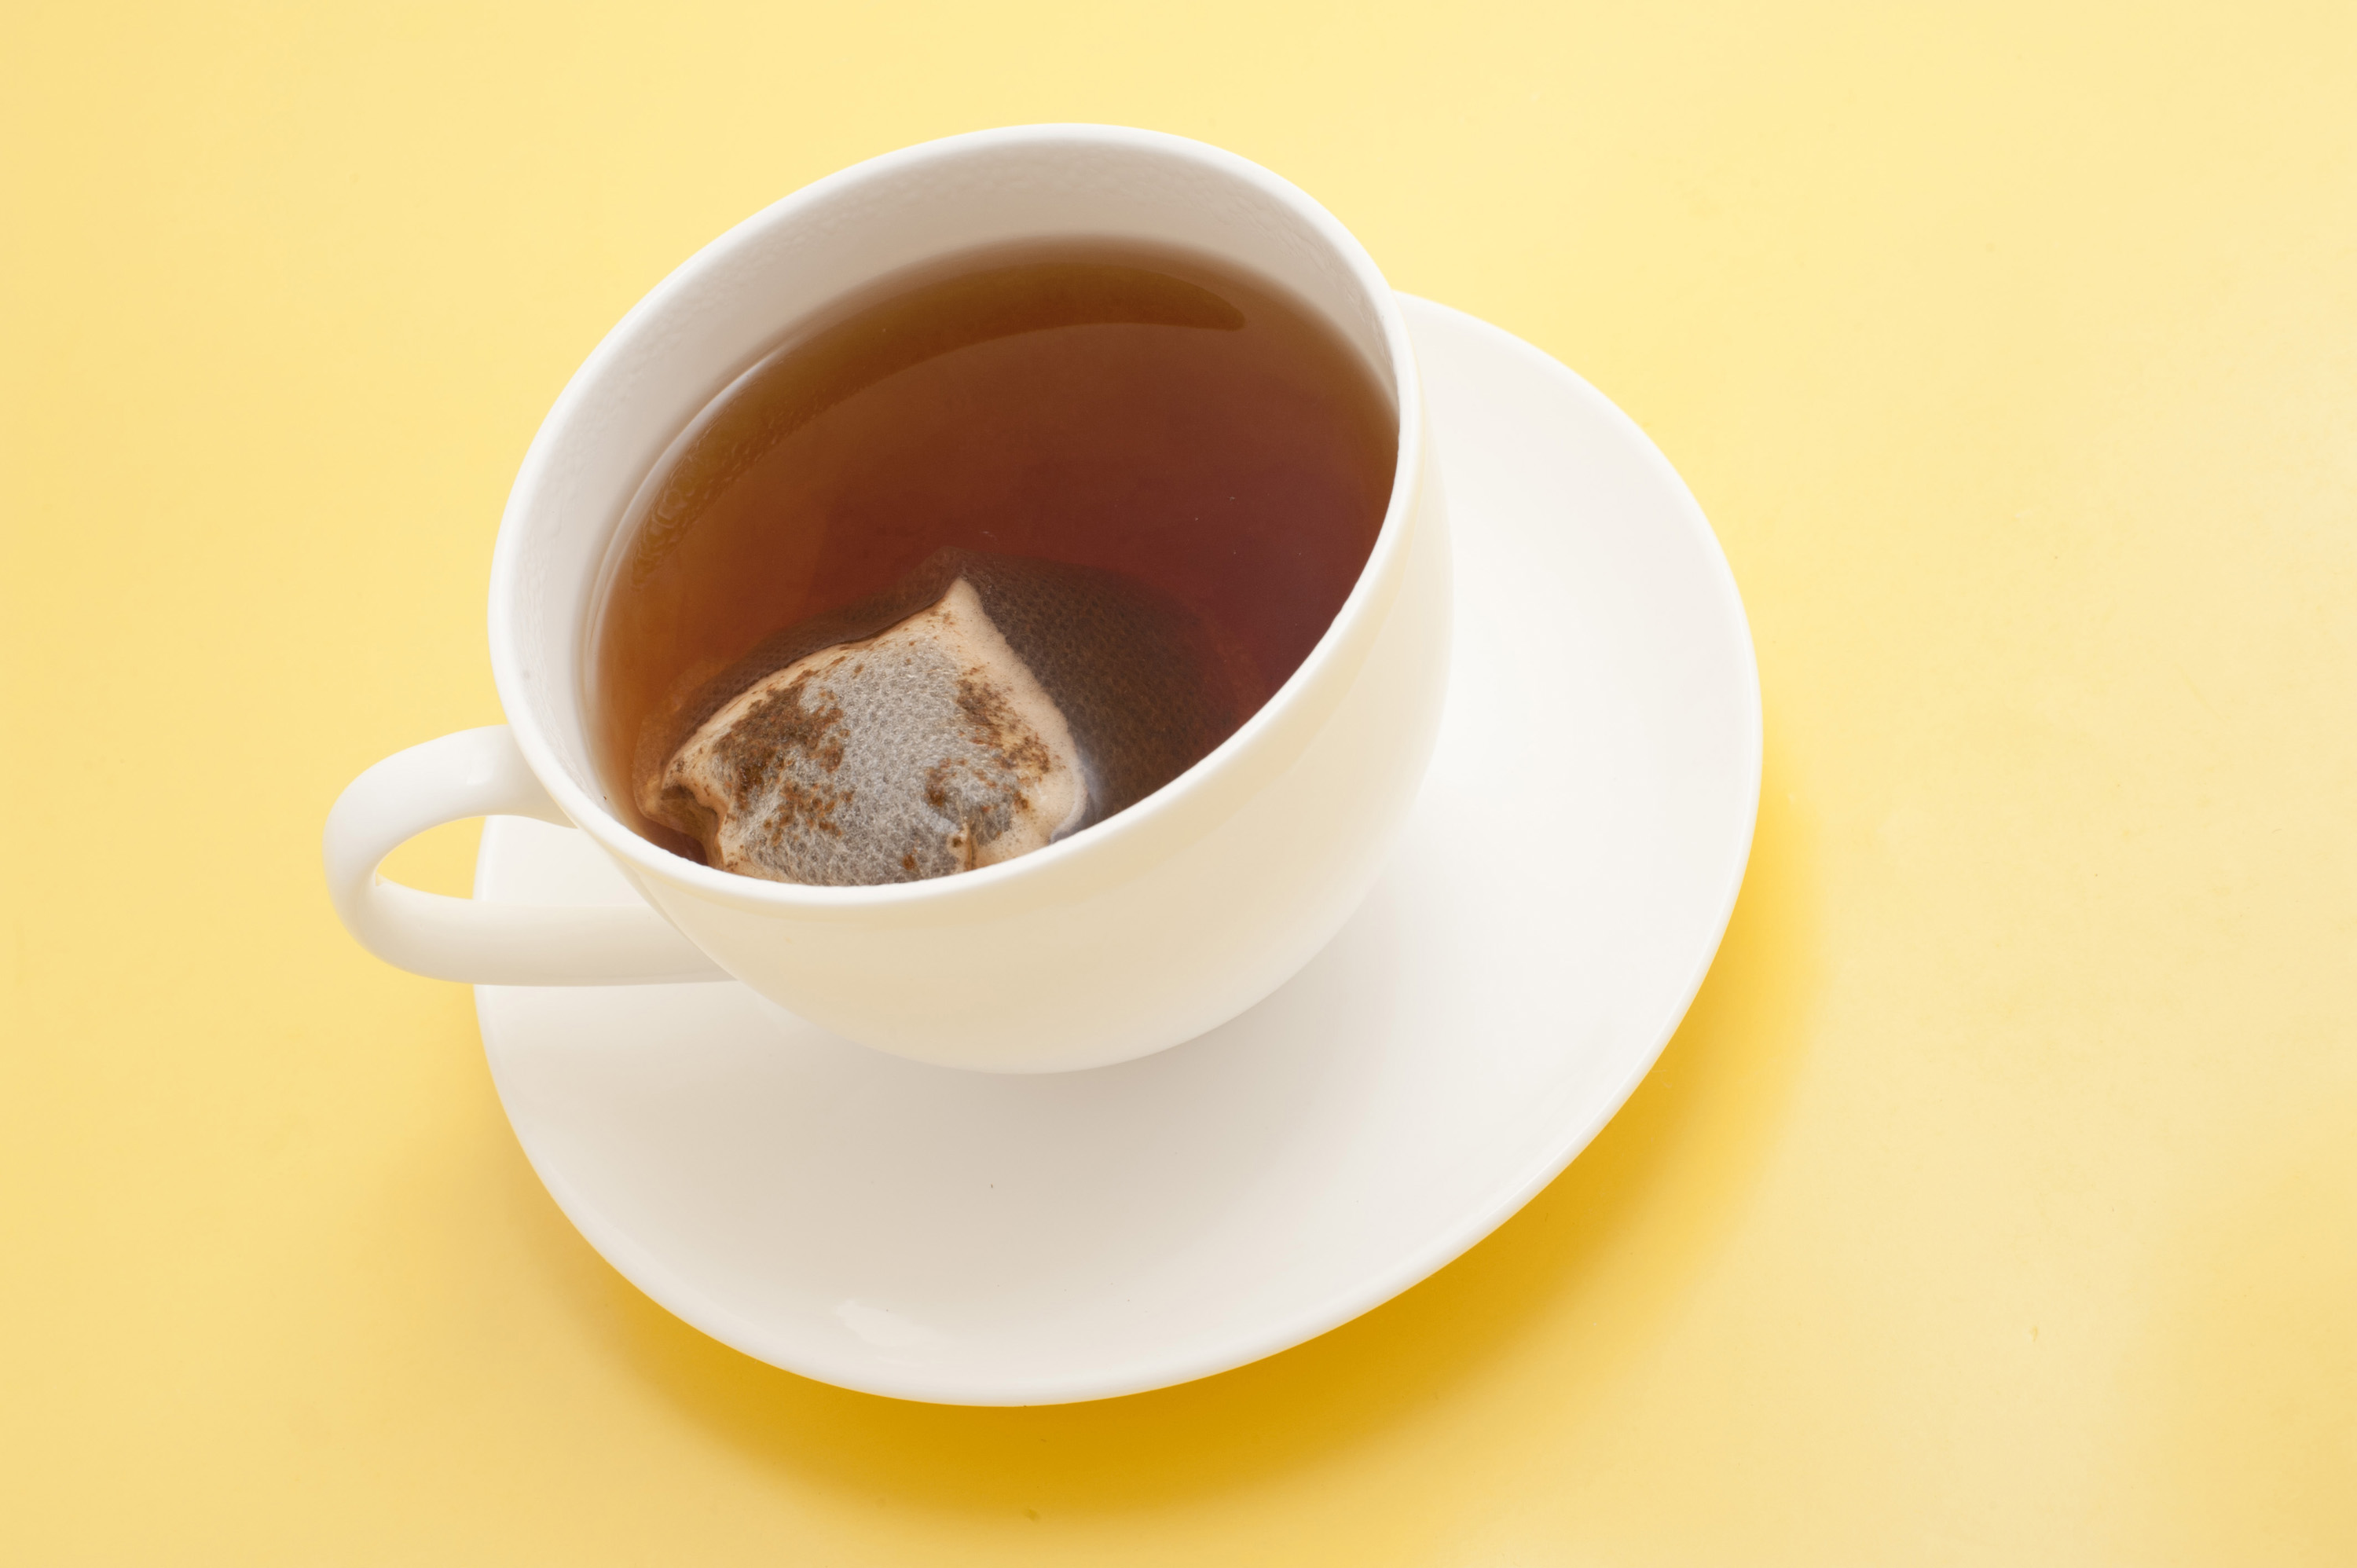 free-stock-photo-9954-cup-of-black-tea-with-a-teabag-freeimageslive